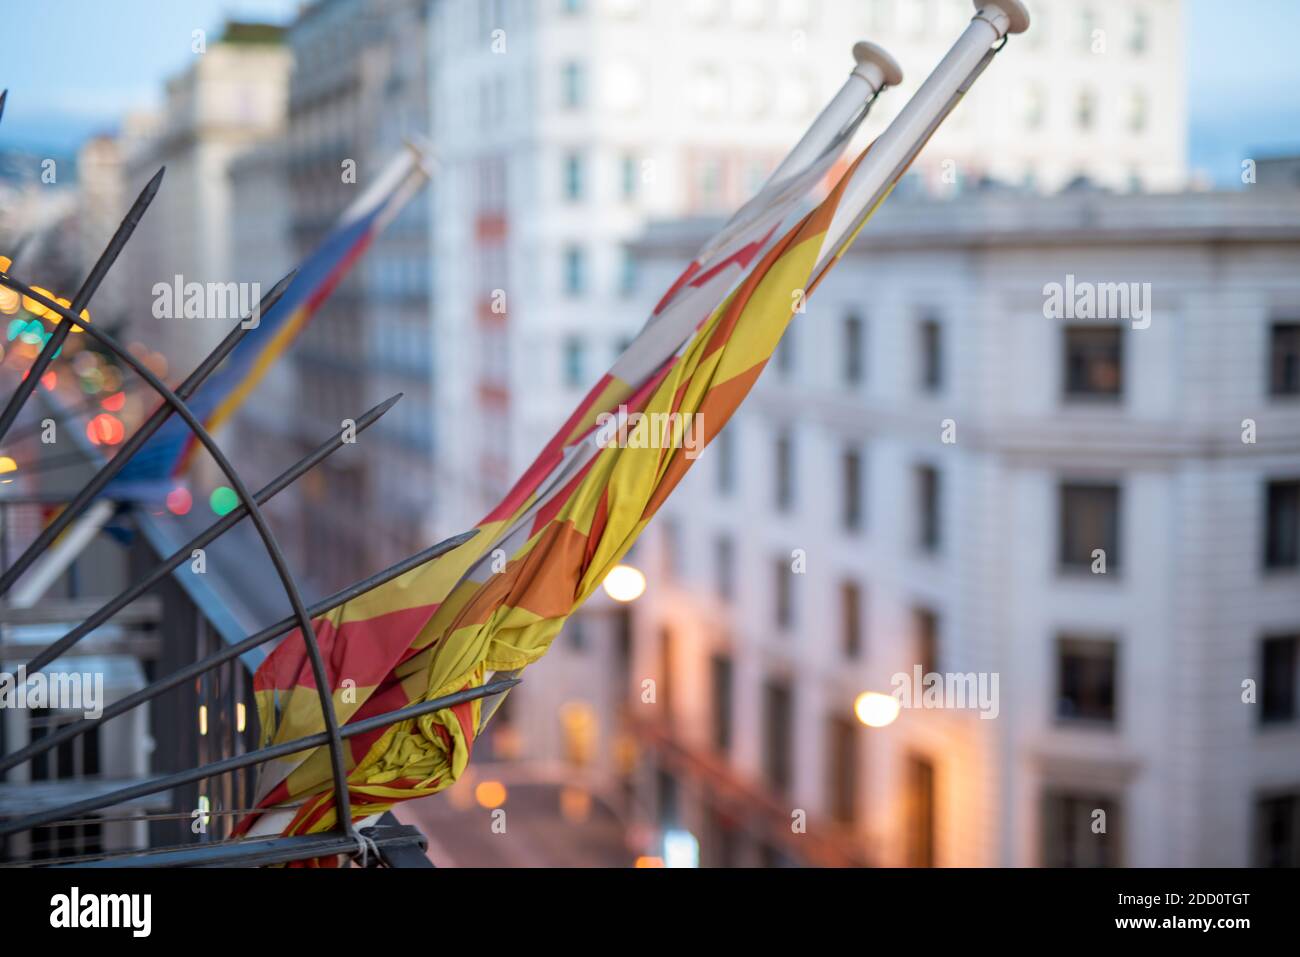 Rolled flag on balcony of building, concept of protest suspended Stock Photo